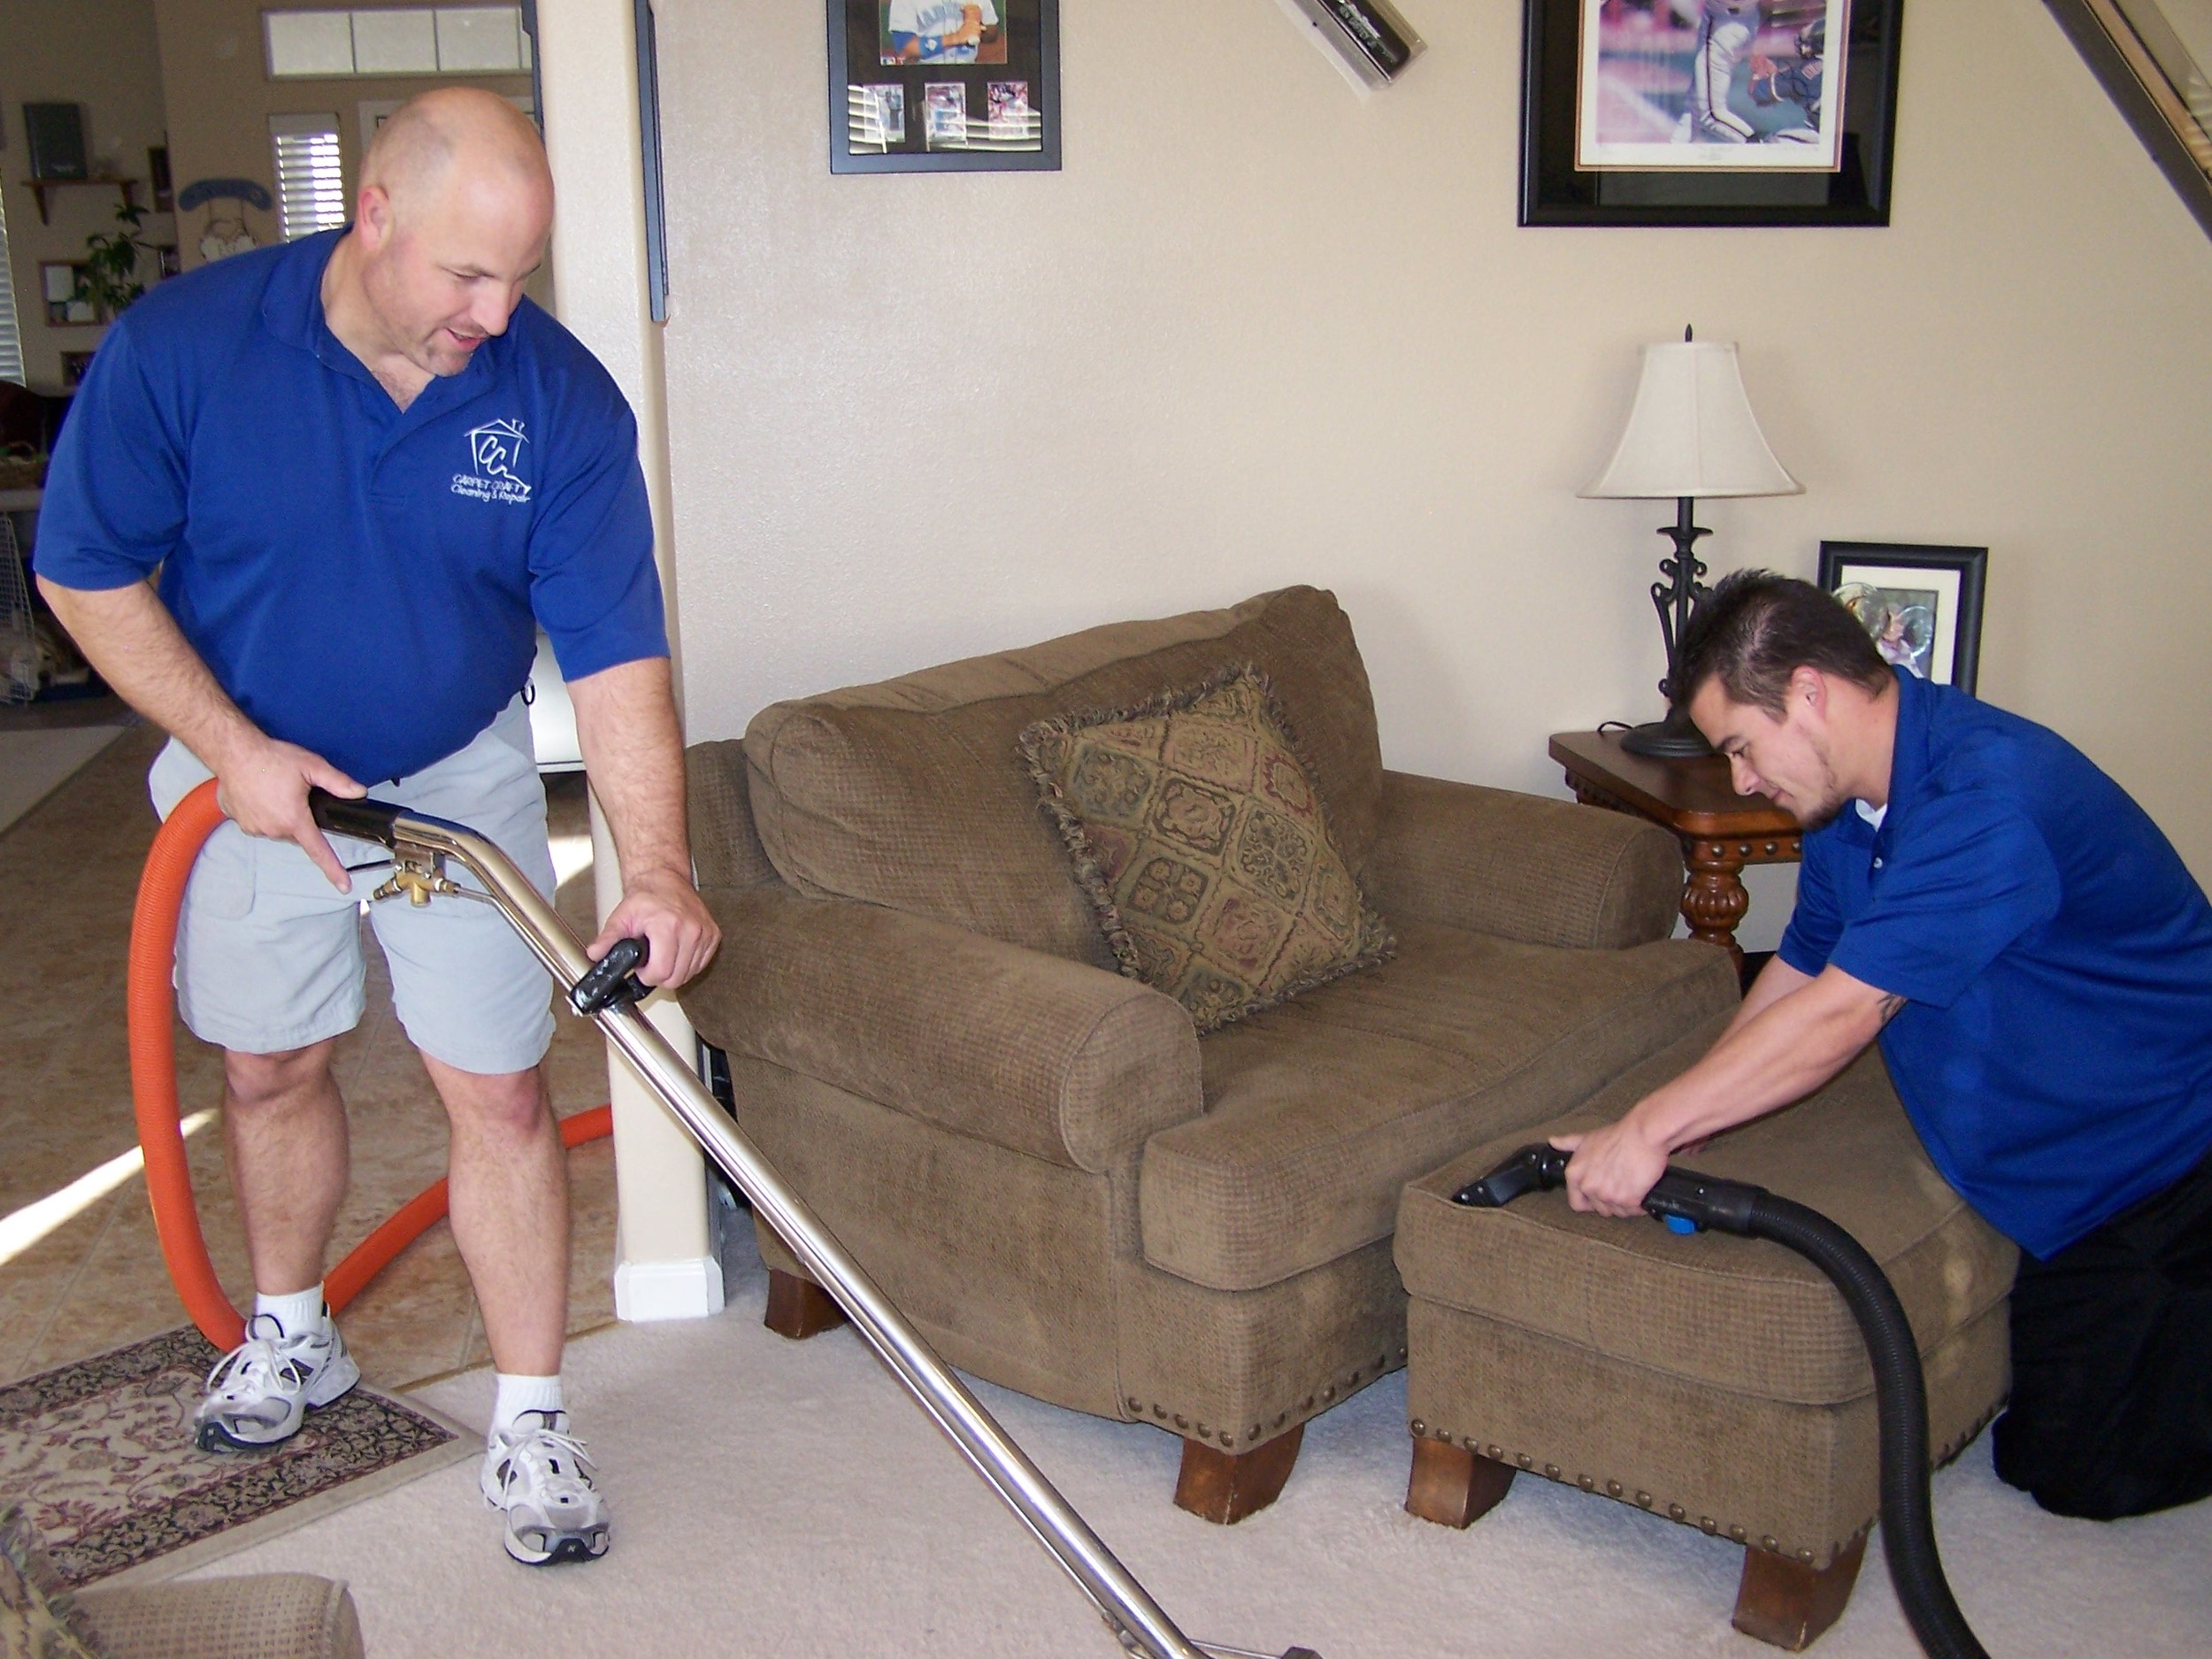 In 2008 Carpet Craft A Local And Family Owned Company Was Started With Vision Of Providing Great Service For Fair Flat Since Then We Have Become One The Most Trusted Dependable Cleaners Reno Sparks Area